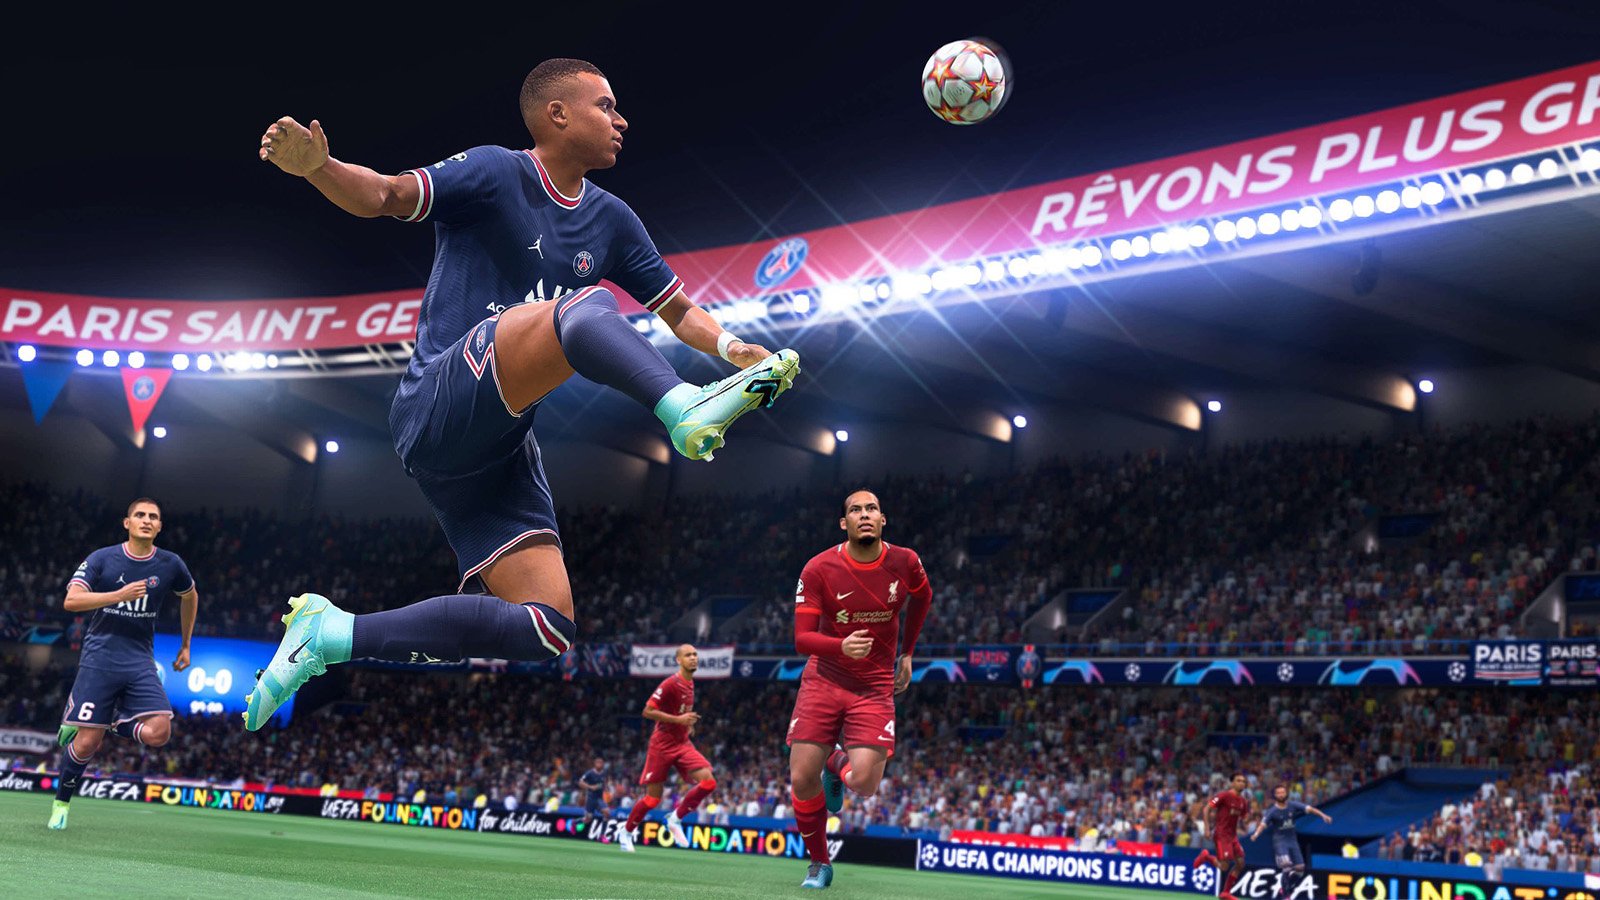 FIFA 22 Gameplay Reveal: Pros Showcase New Hypermotion Technology and Features